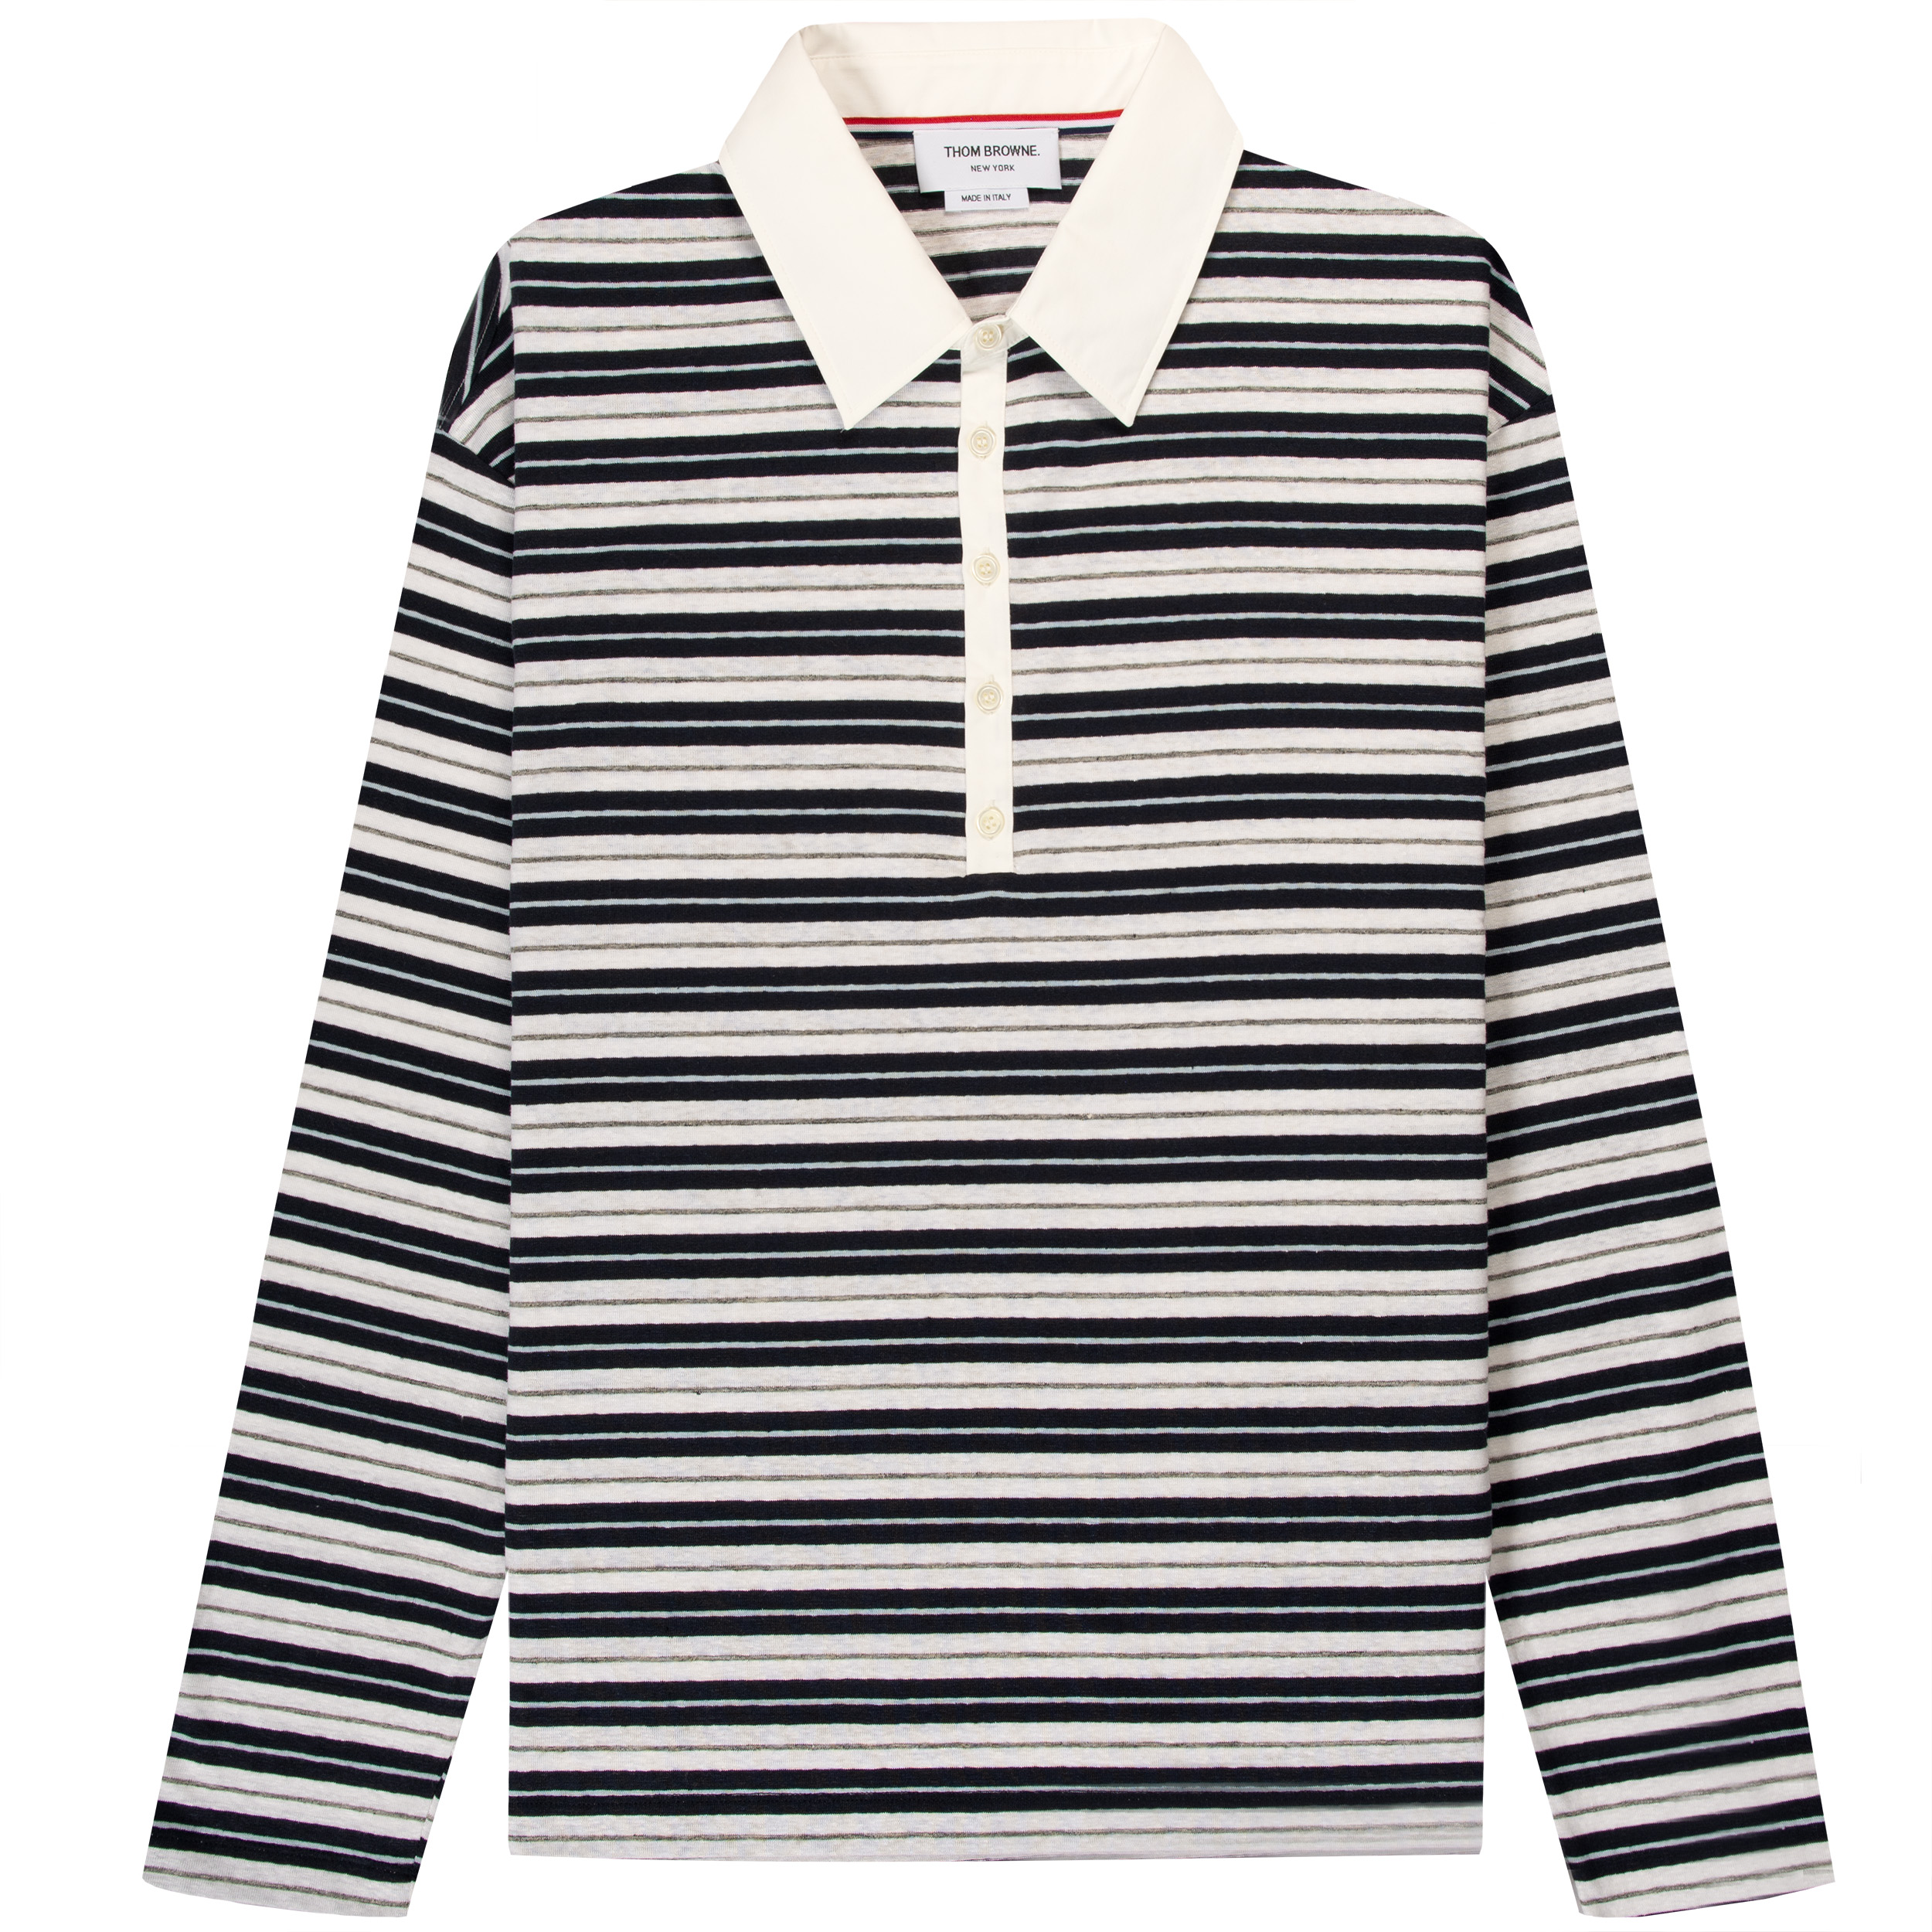 Thom Browne LS Striped Rugby Shirt Navy/White